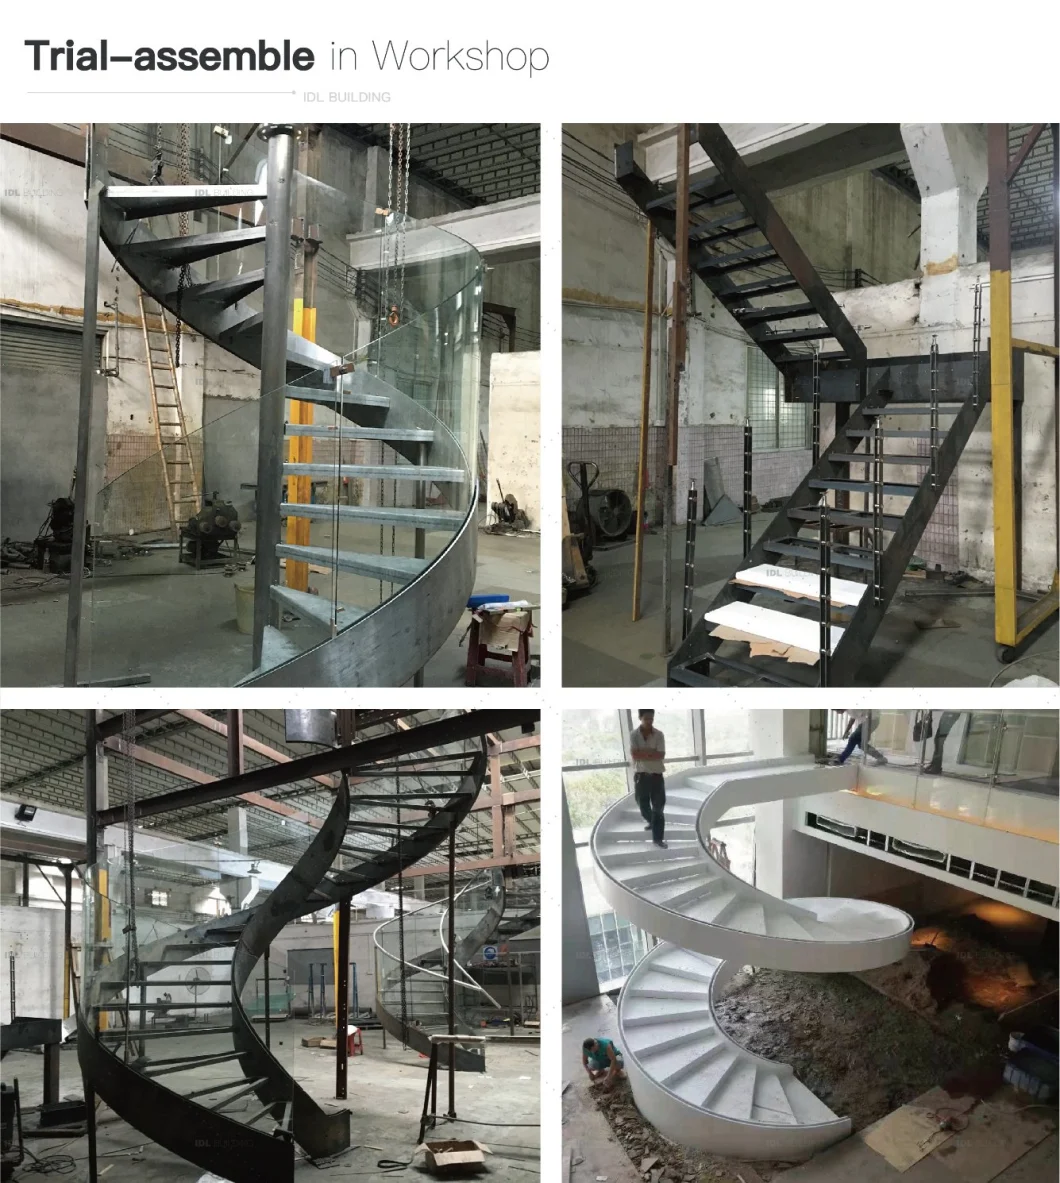 Commercial Metal Stairs Modern Indoor Stairs Design Customized U Shape Steel Staircase with Cable Railing Wood Stair Handrail